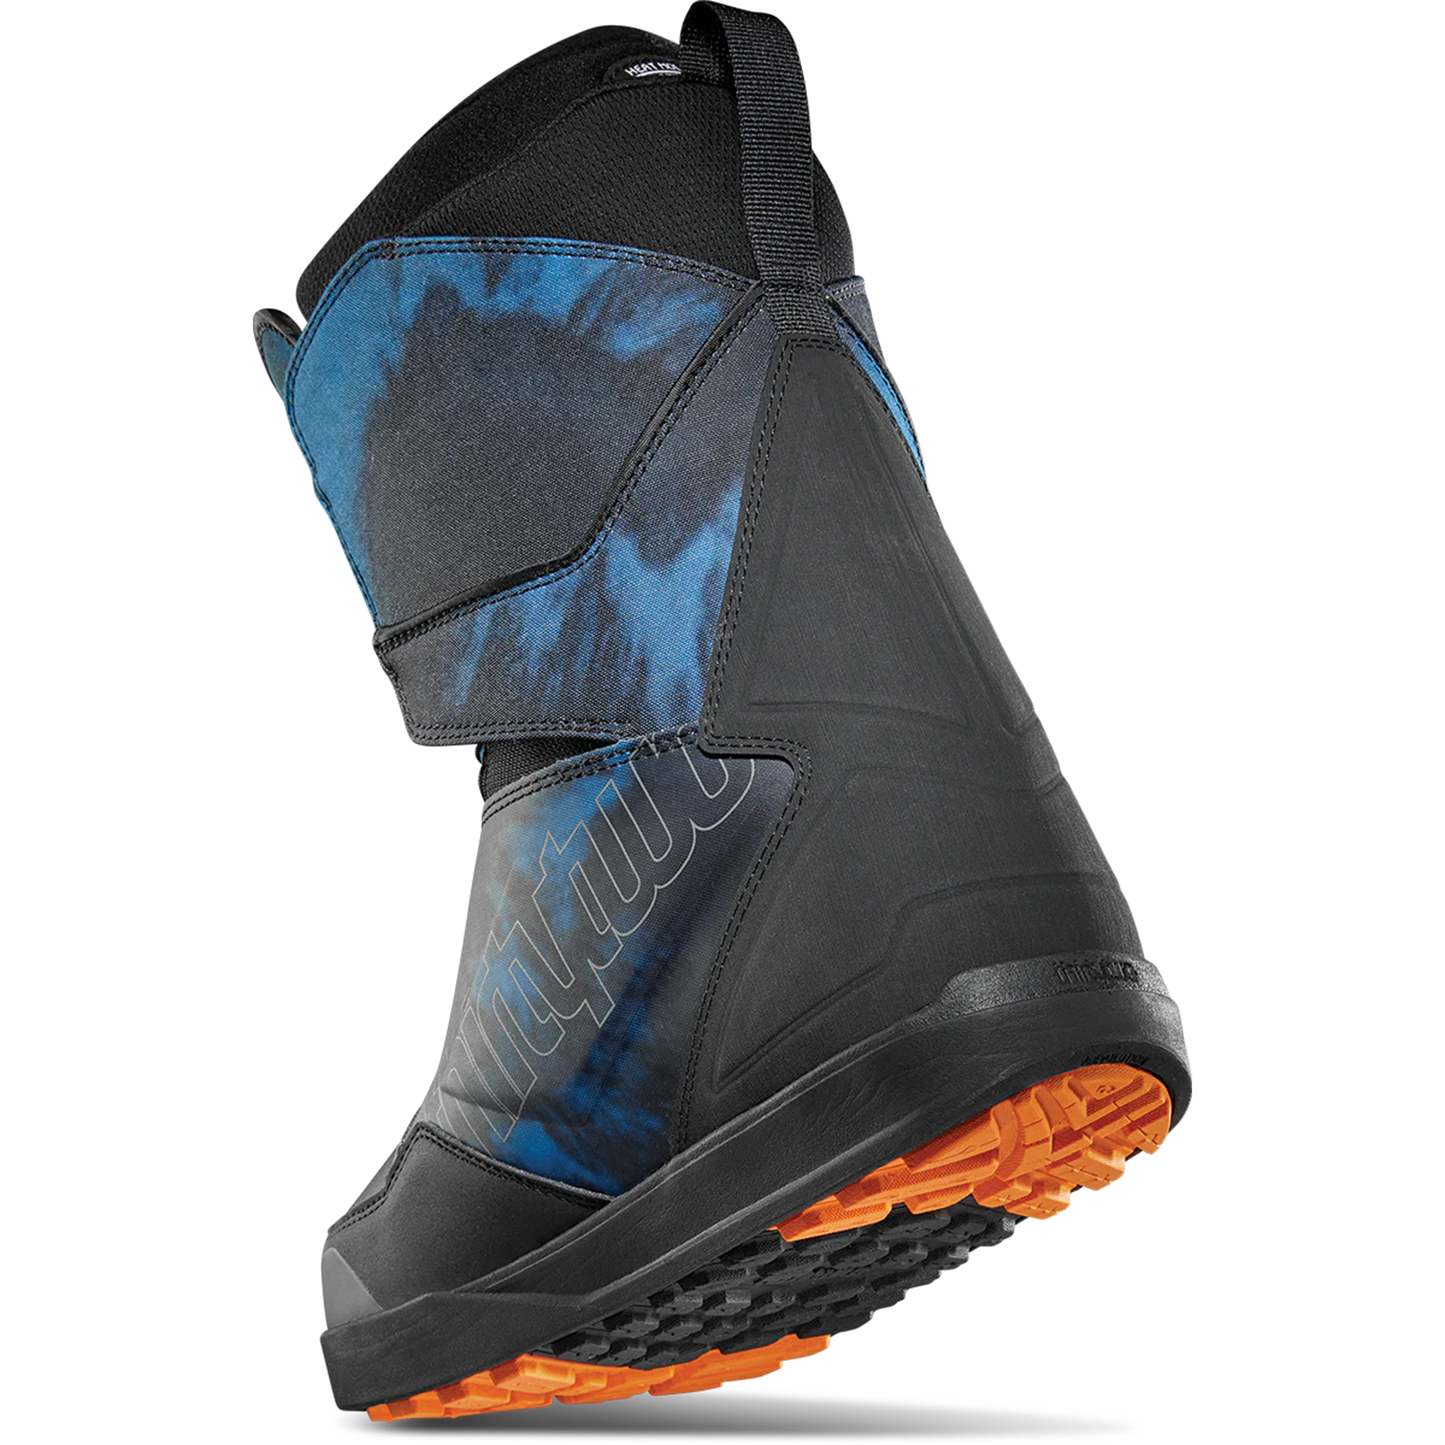 ThirtyTwo Lashed Double BOA Snowboard Boots Tie Dye Snowboard Boots